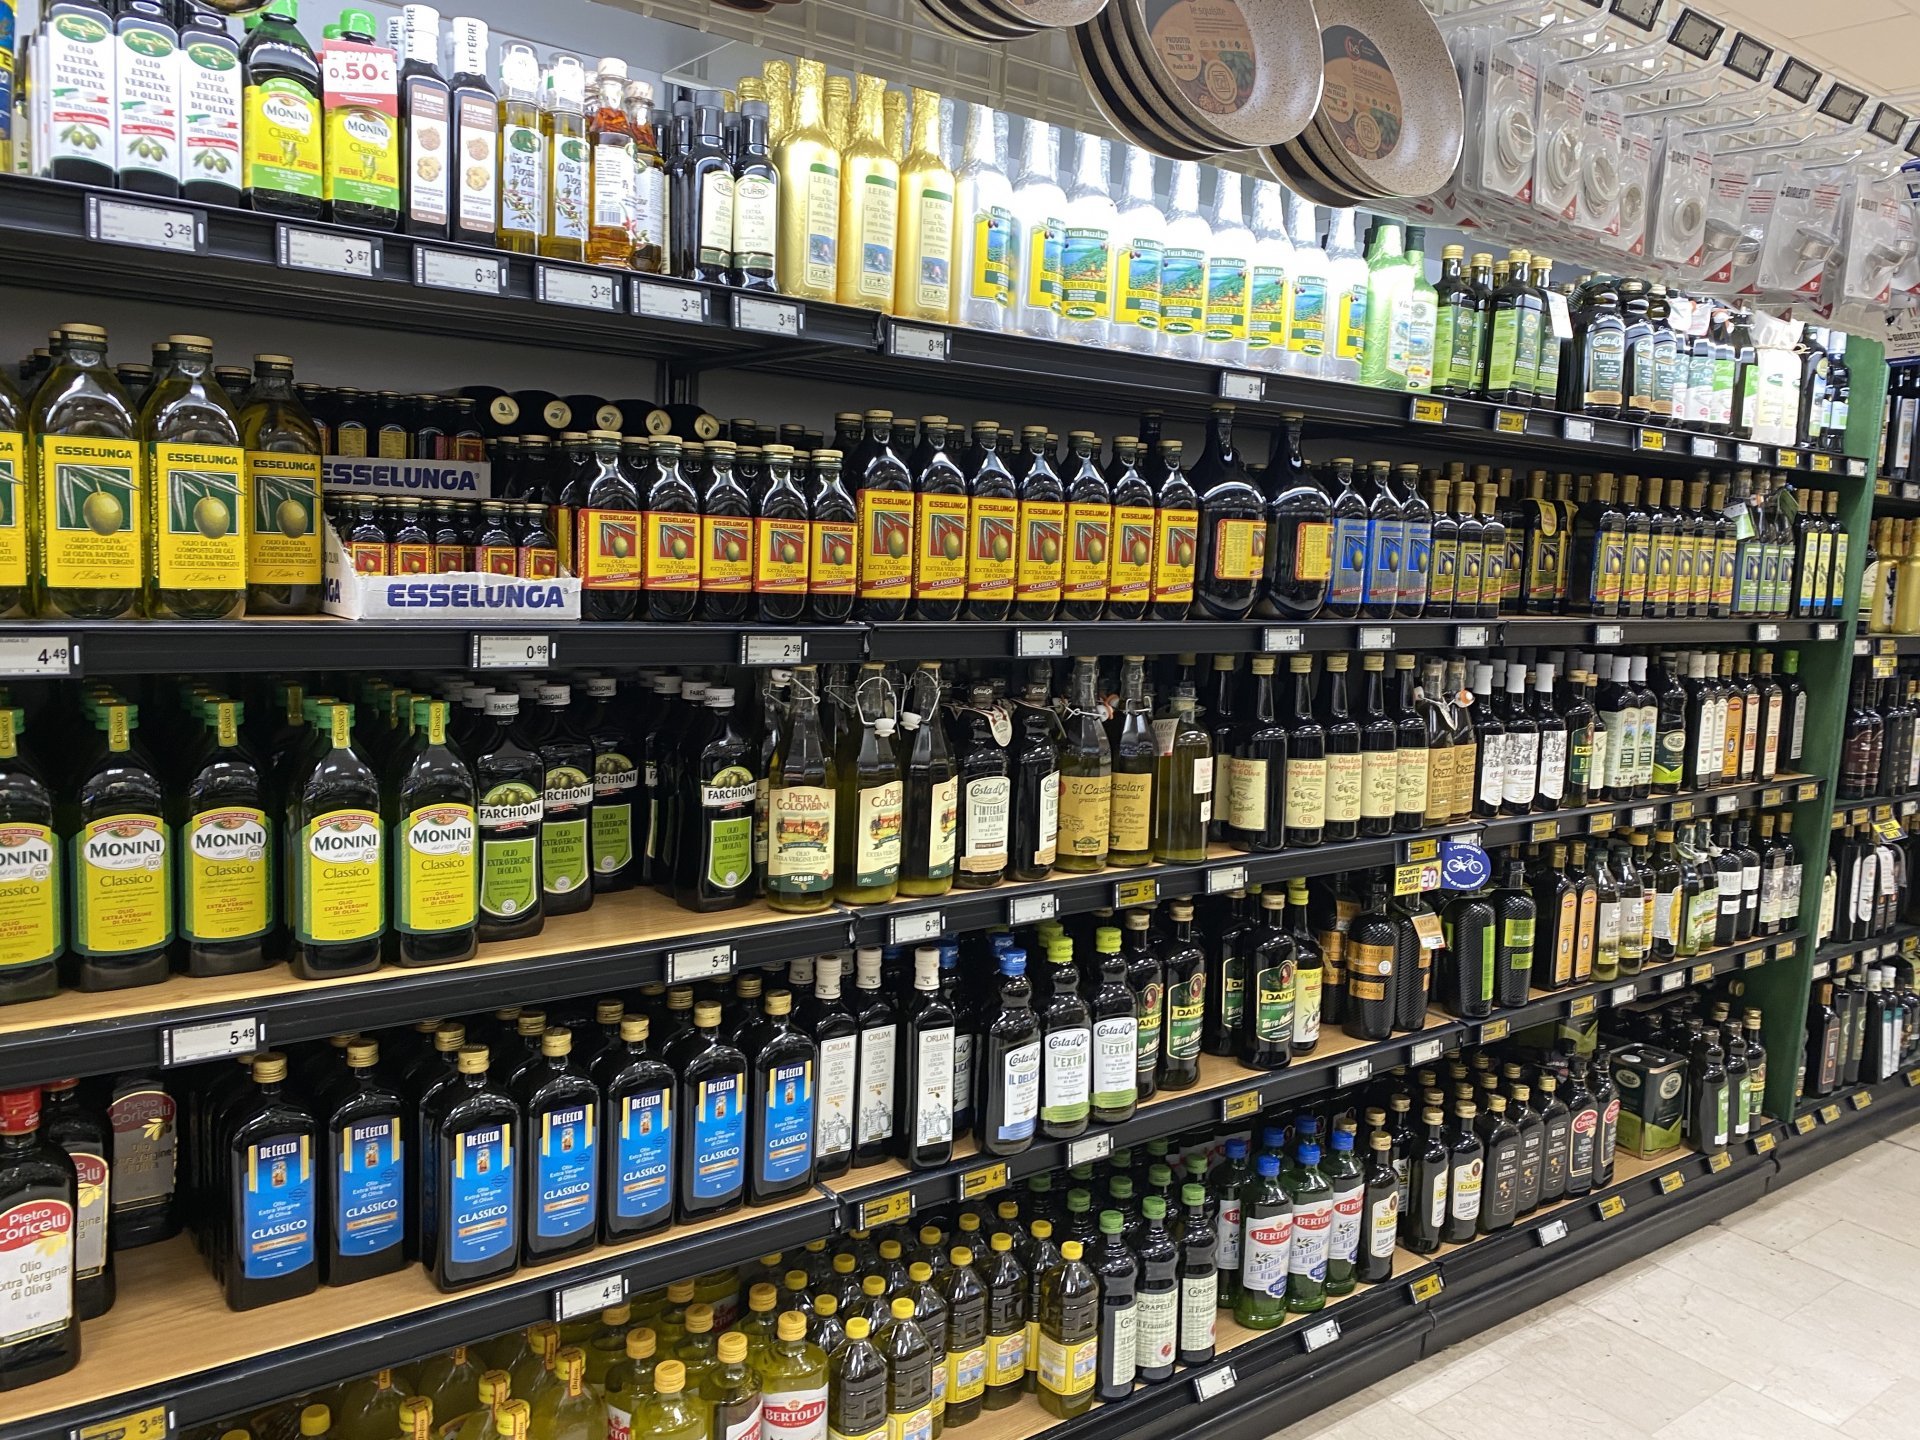 Olive oil stocked in Italy. Update of 28 February 2022